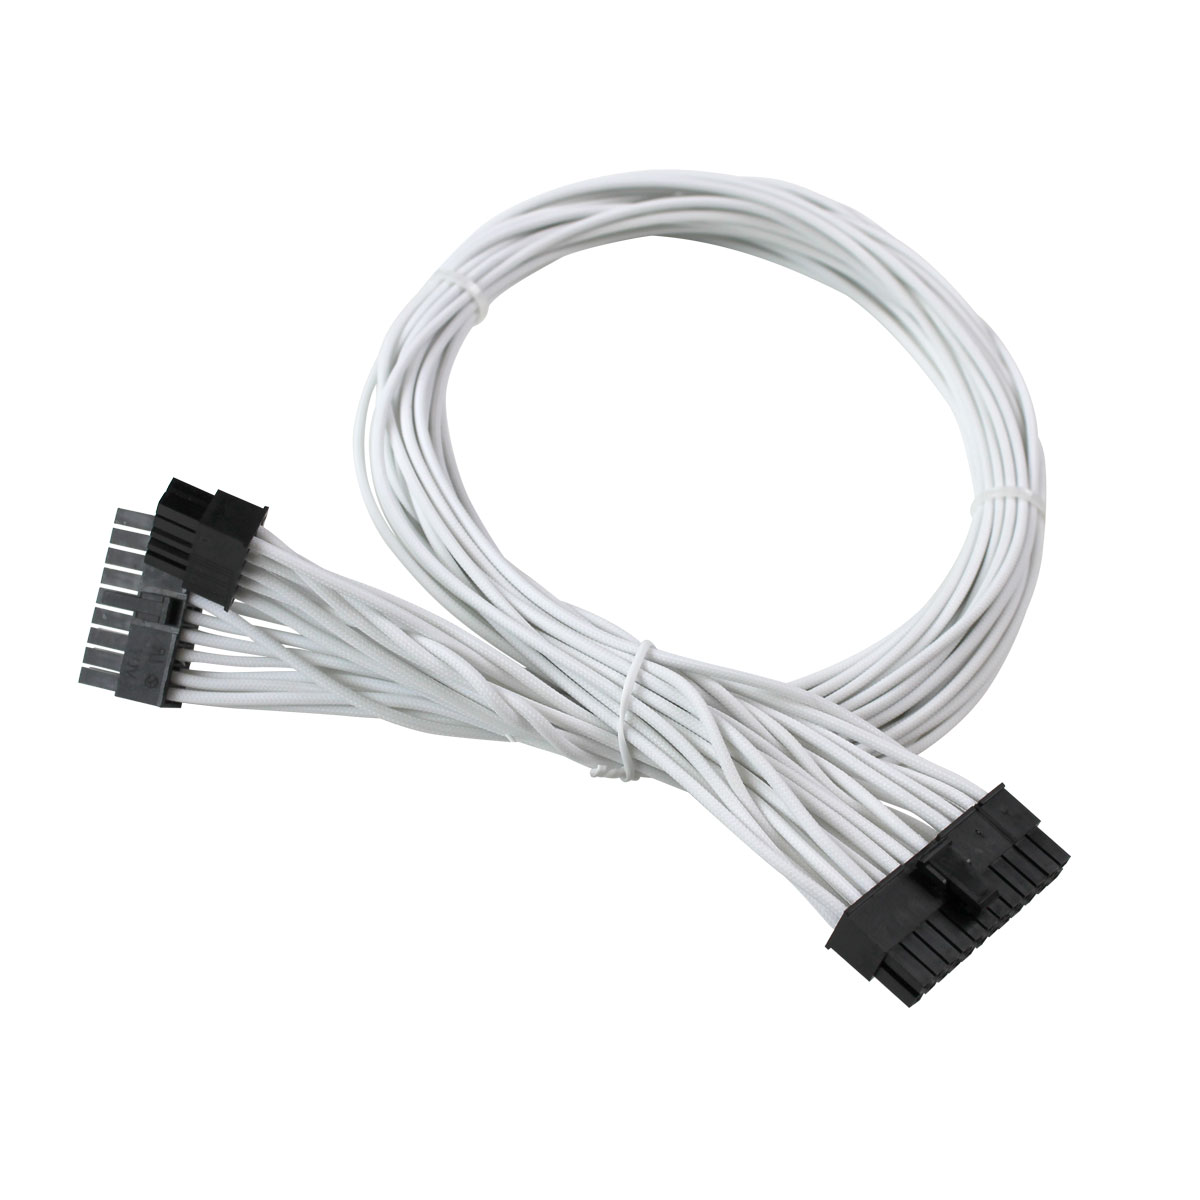 EVGA - Products - GS/PS (850/1050/1000) White Power Supply Cable Set